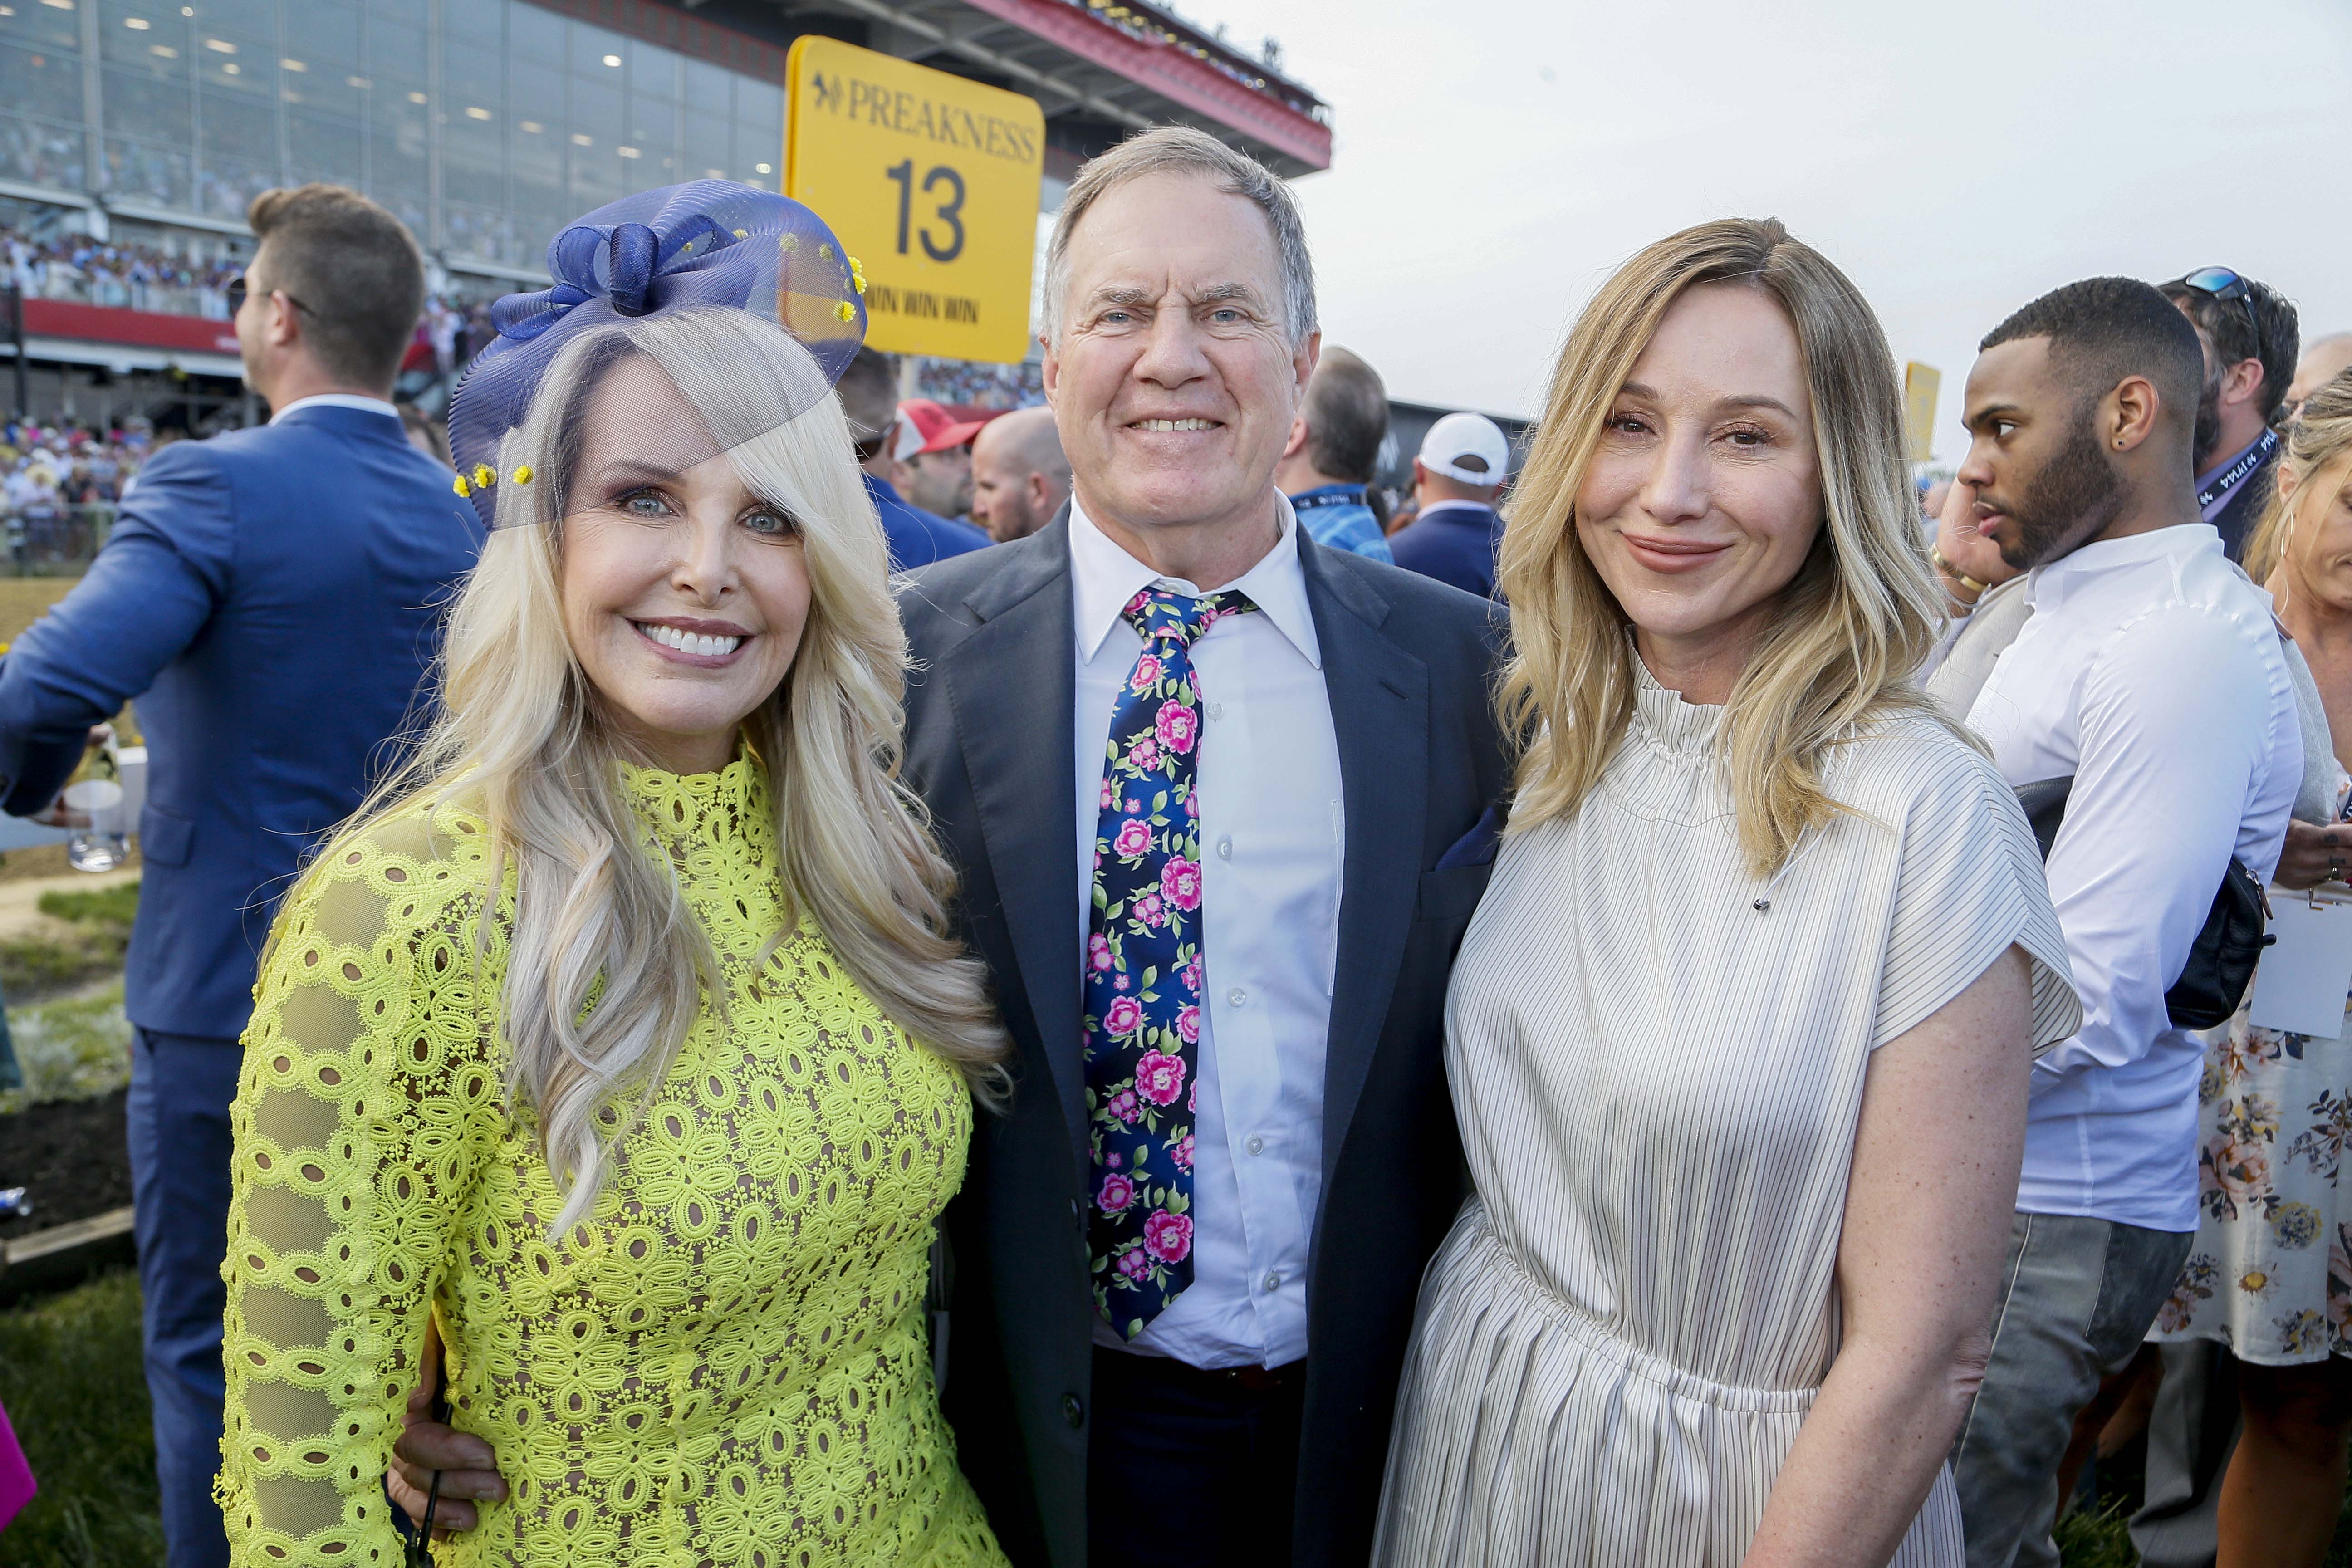 Debby Clarke Belichick, Bill Belichick, and Belinda Stronach in Baltimore, Maryland, when they attended the 144th Preakness Stakes at Pimlico Race Track on May 18, 2019. | Source: Getty Images 